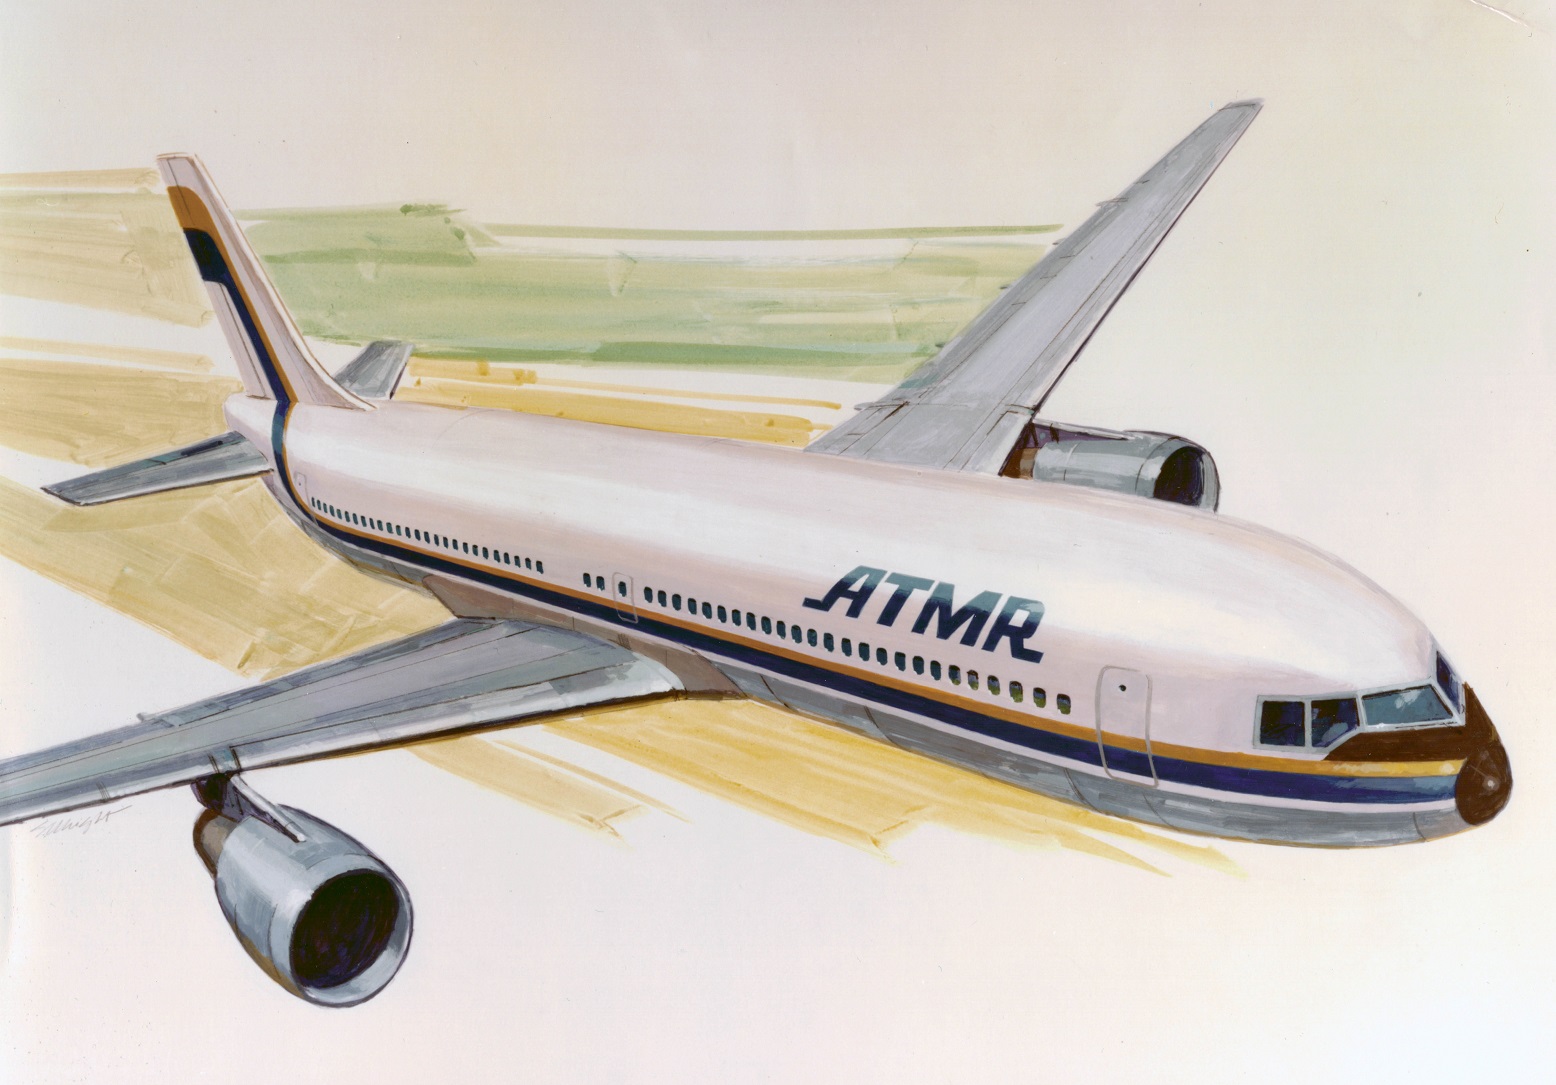 ATMR which became the DC-11 is nearly identical to the 797 or 808